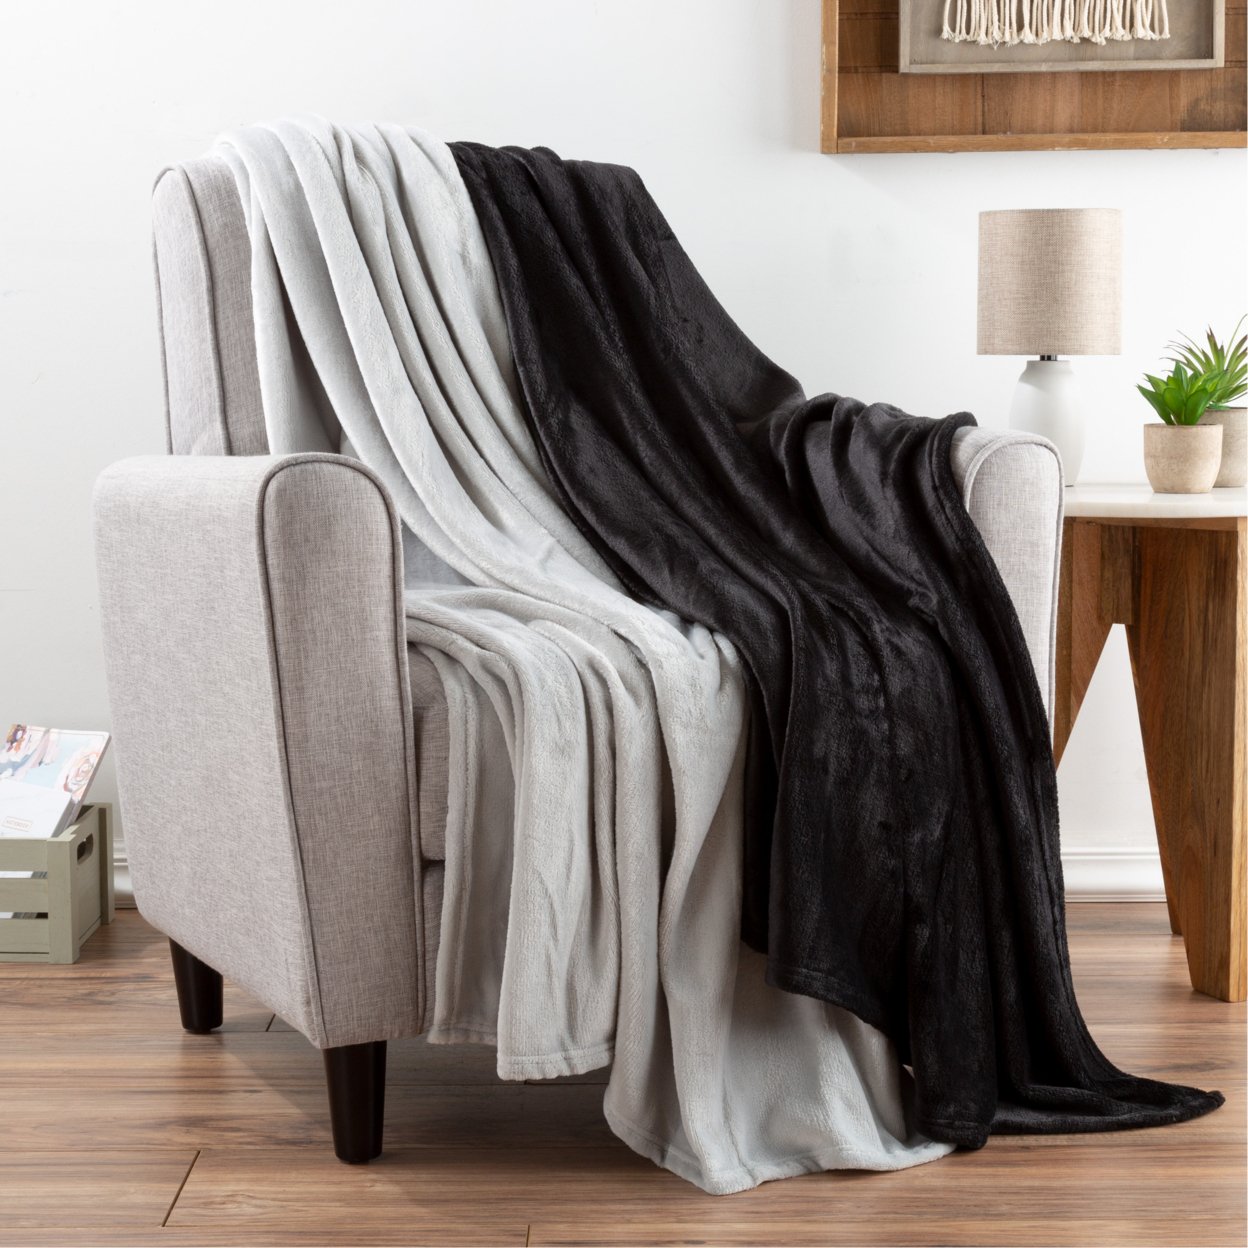 Fleece Throw Blanket-Set Of 2- Black & Gray Plush 50 X 60 Inches Soft Snuggly Chair Couch